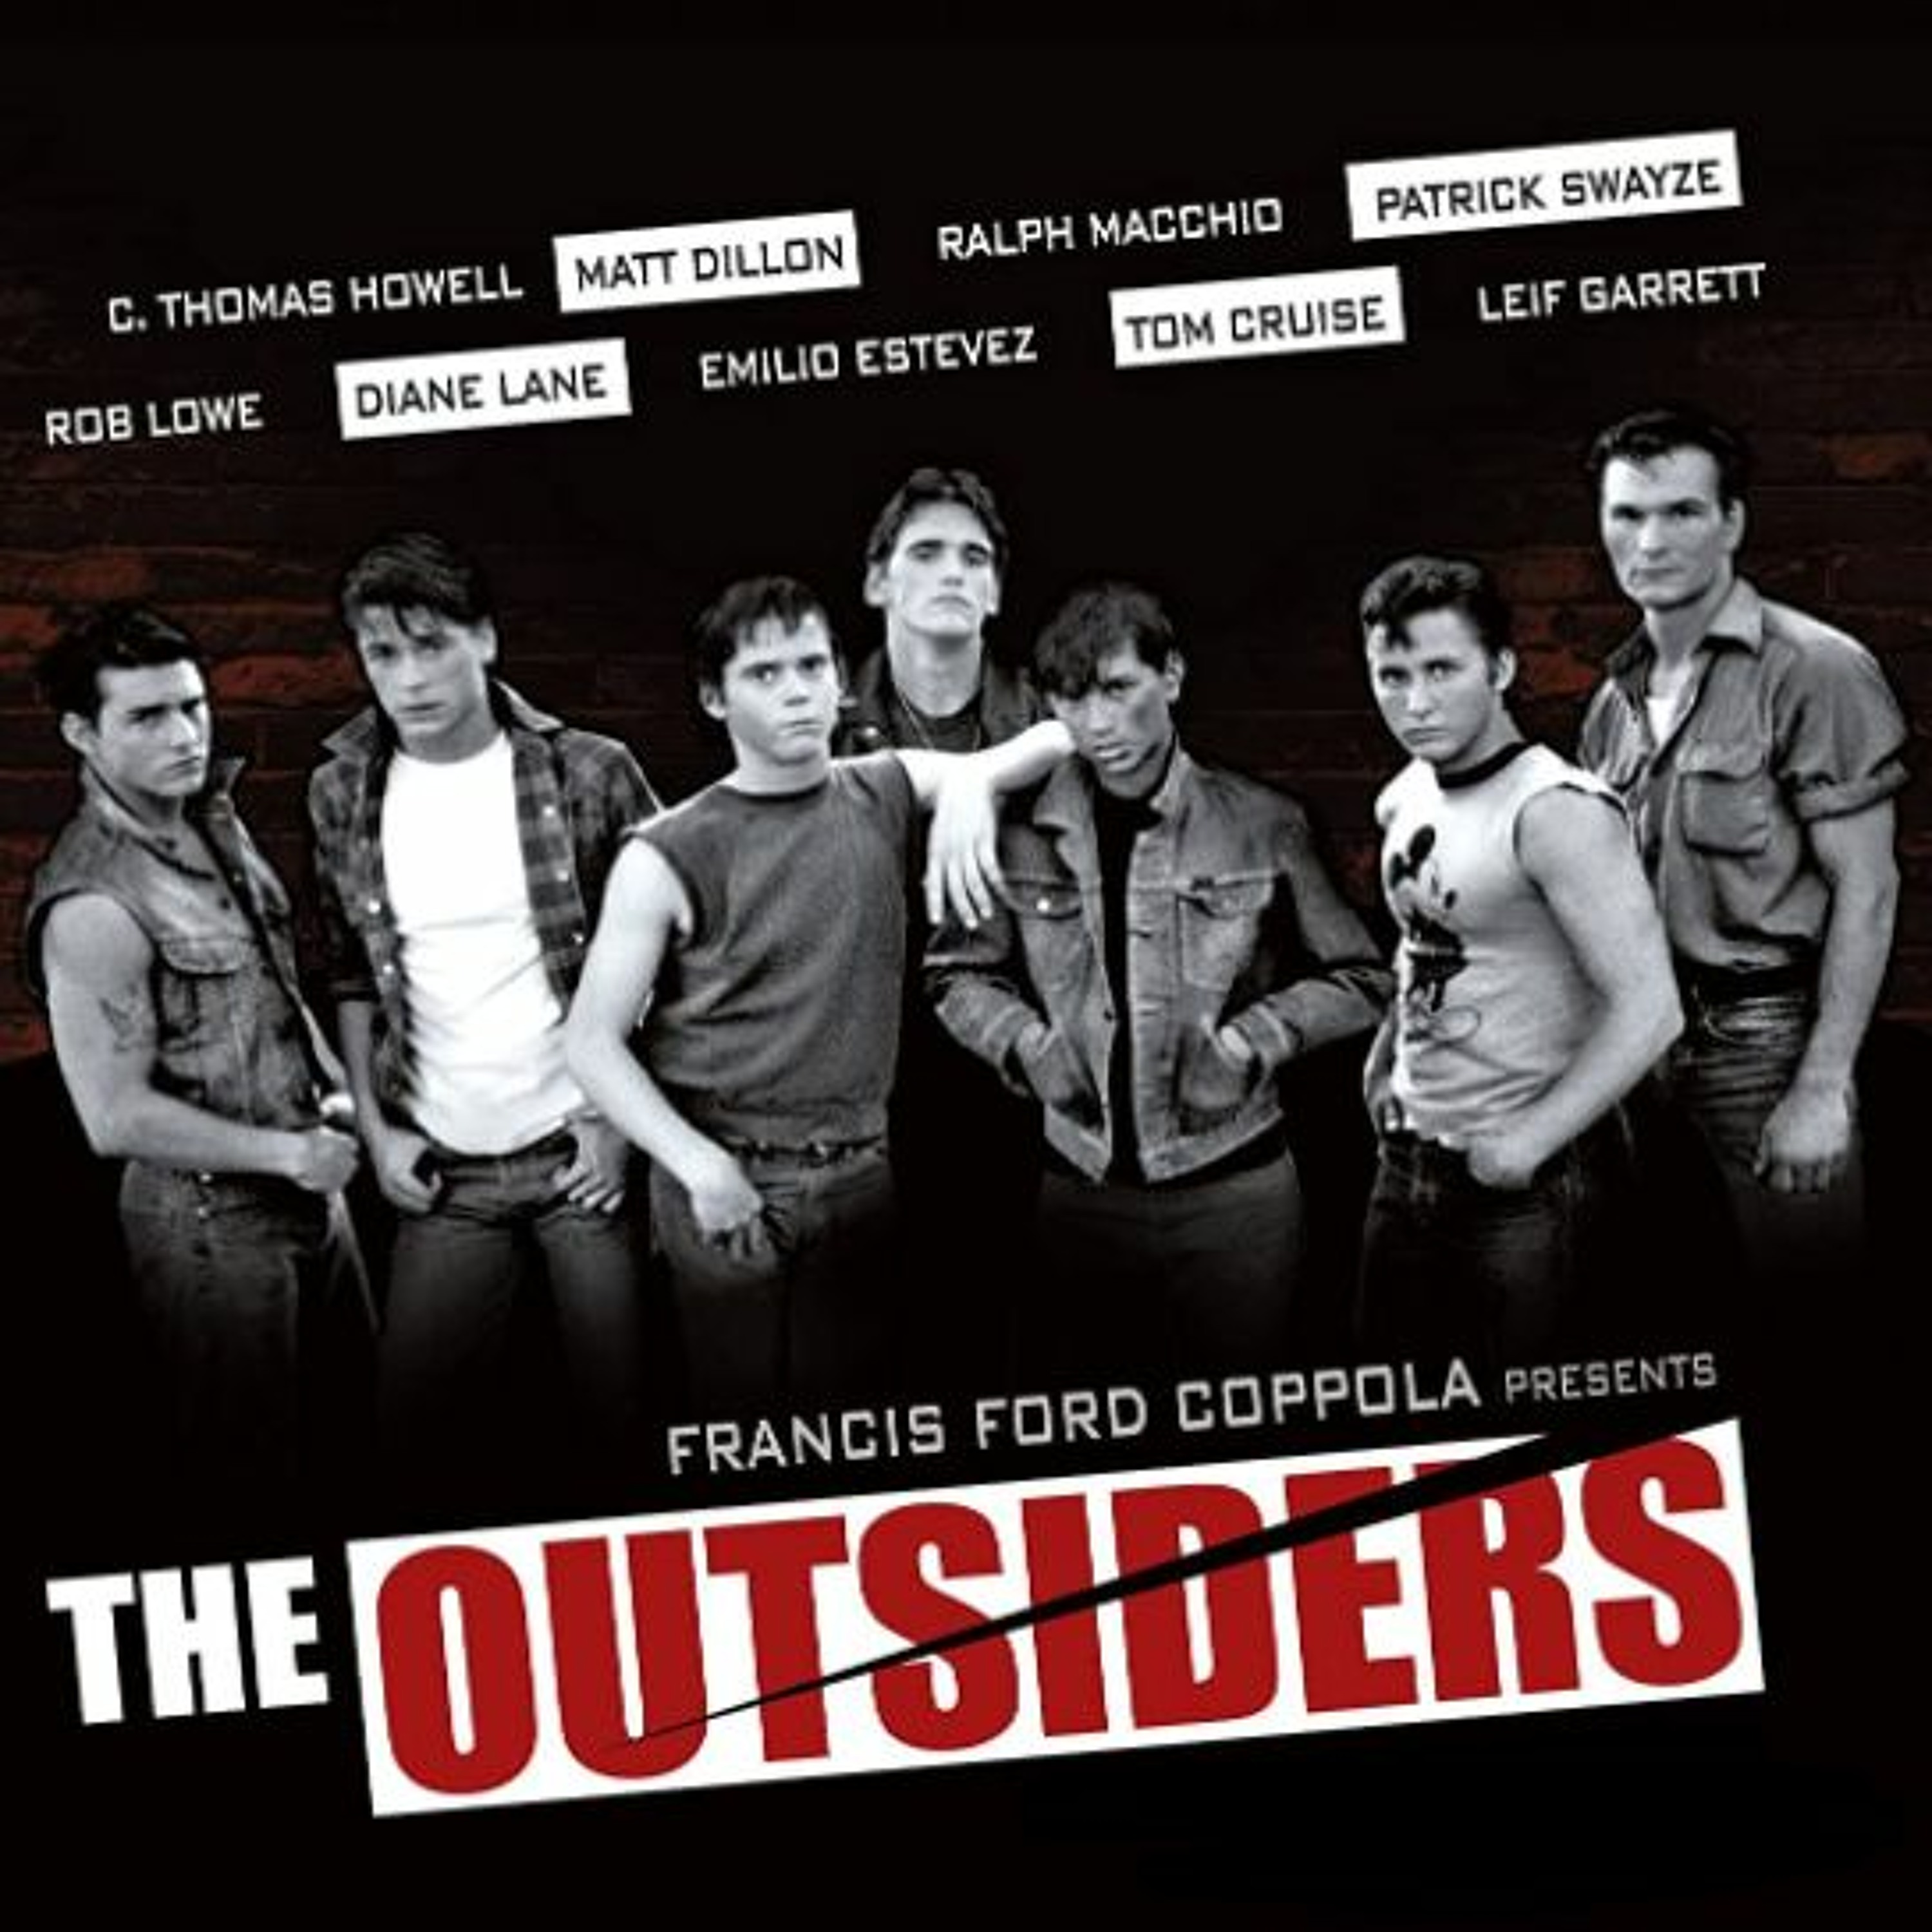 Cruise Control #3: The Outsiders (1983)